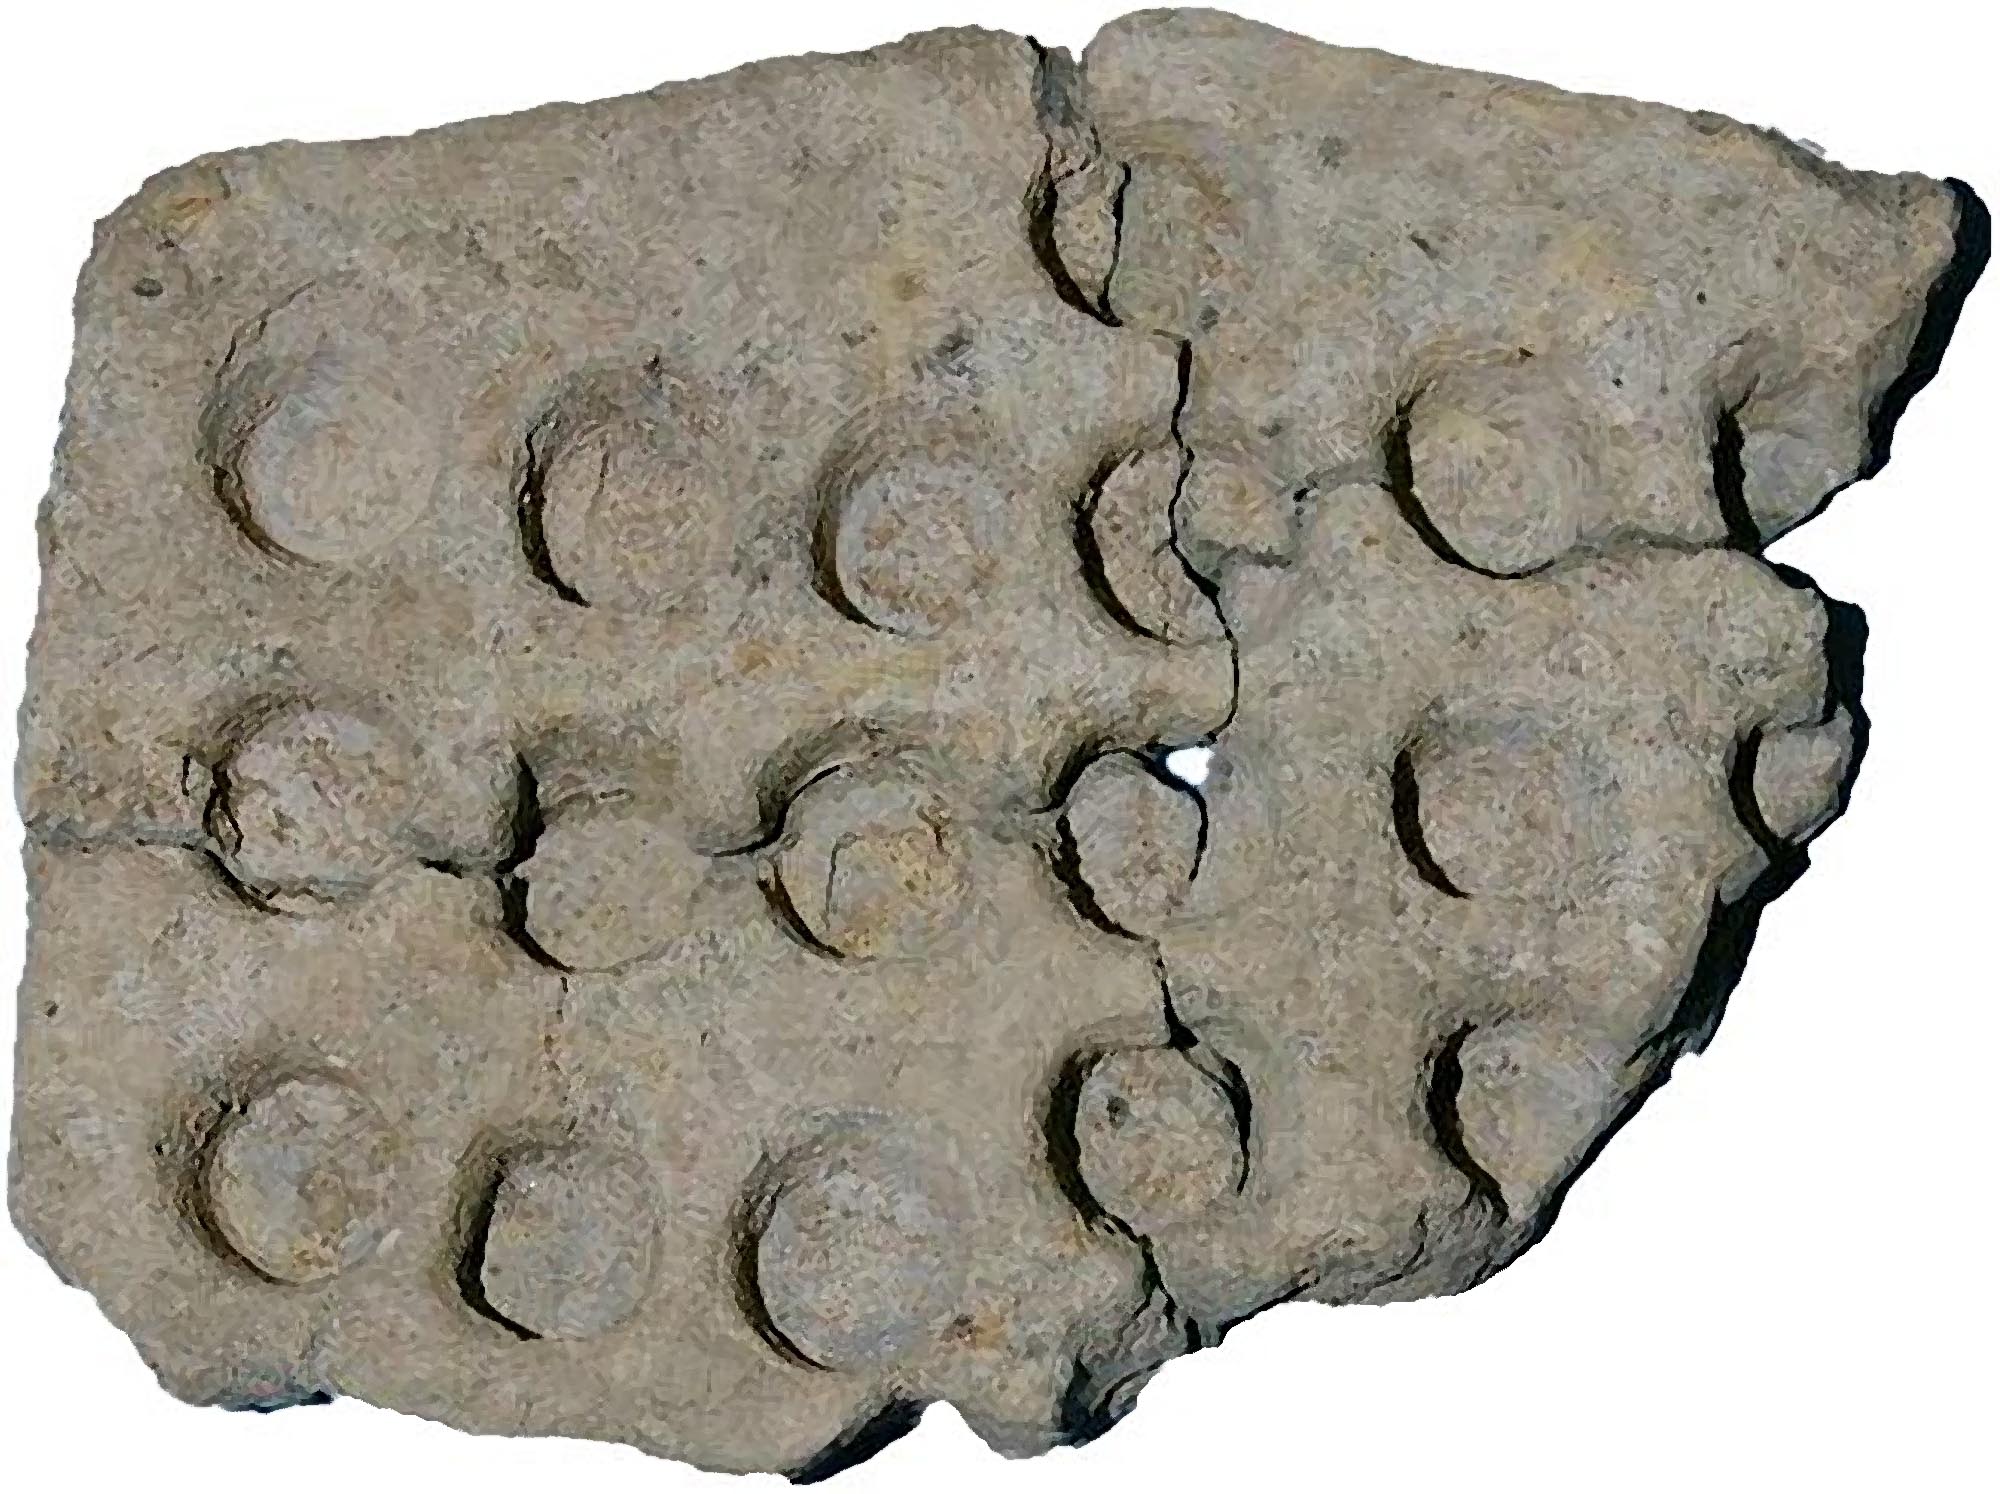 Part of an Iron Age clay tray used to melt metal in order to create blanks for making coins, found at Bath Lane - University of Leicester Archaeological Services